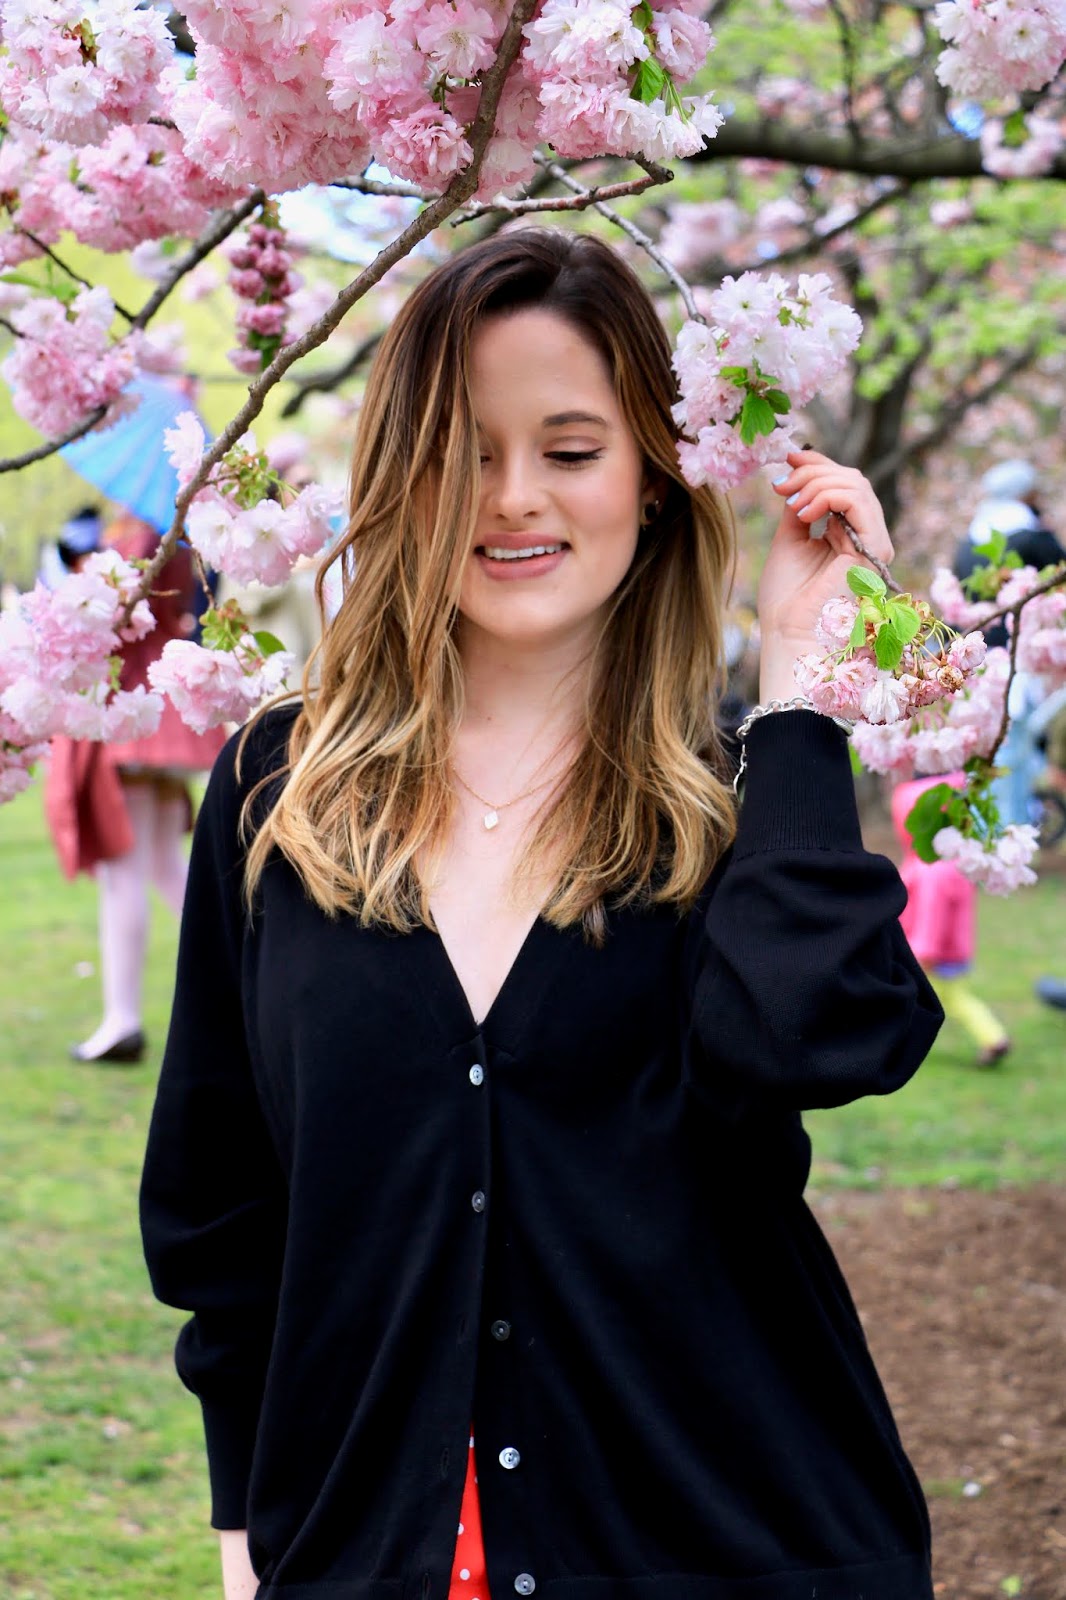 Nyc fashion blogger Kathleen Harper showing how to wear a grandpa cardigan